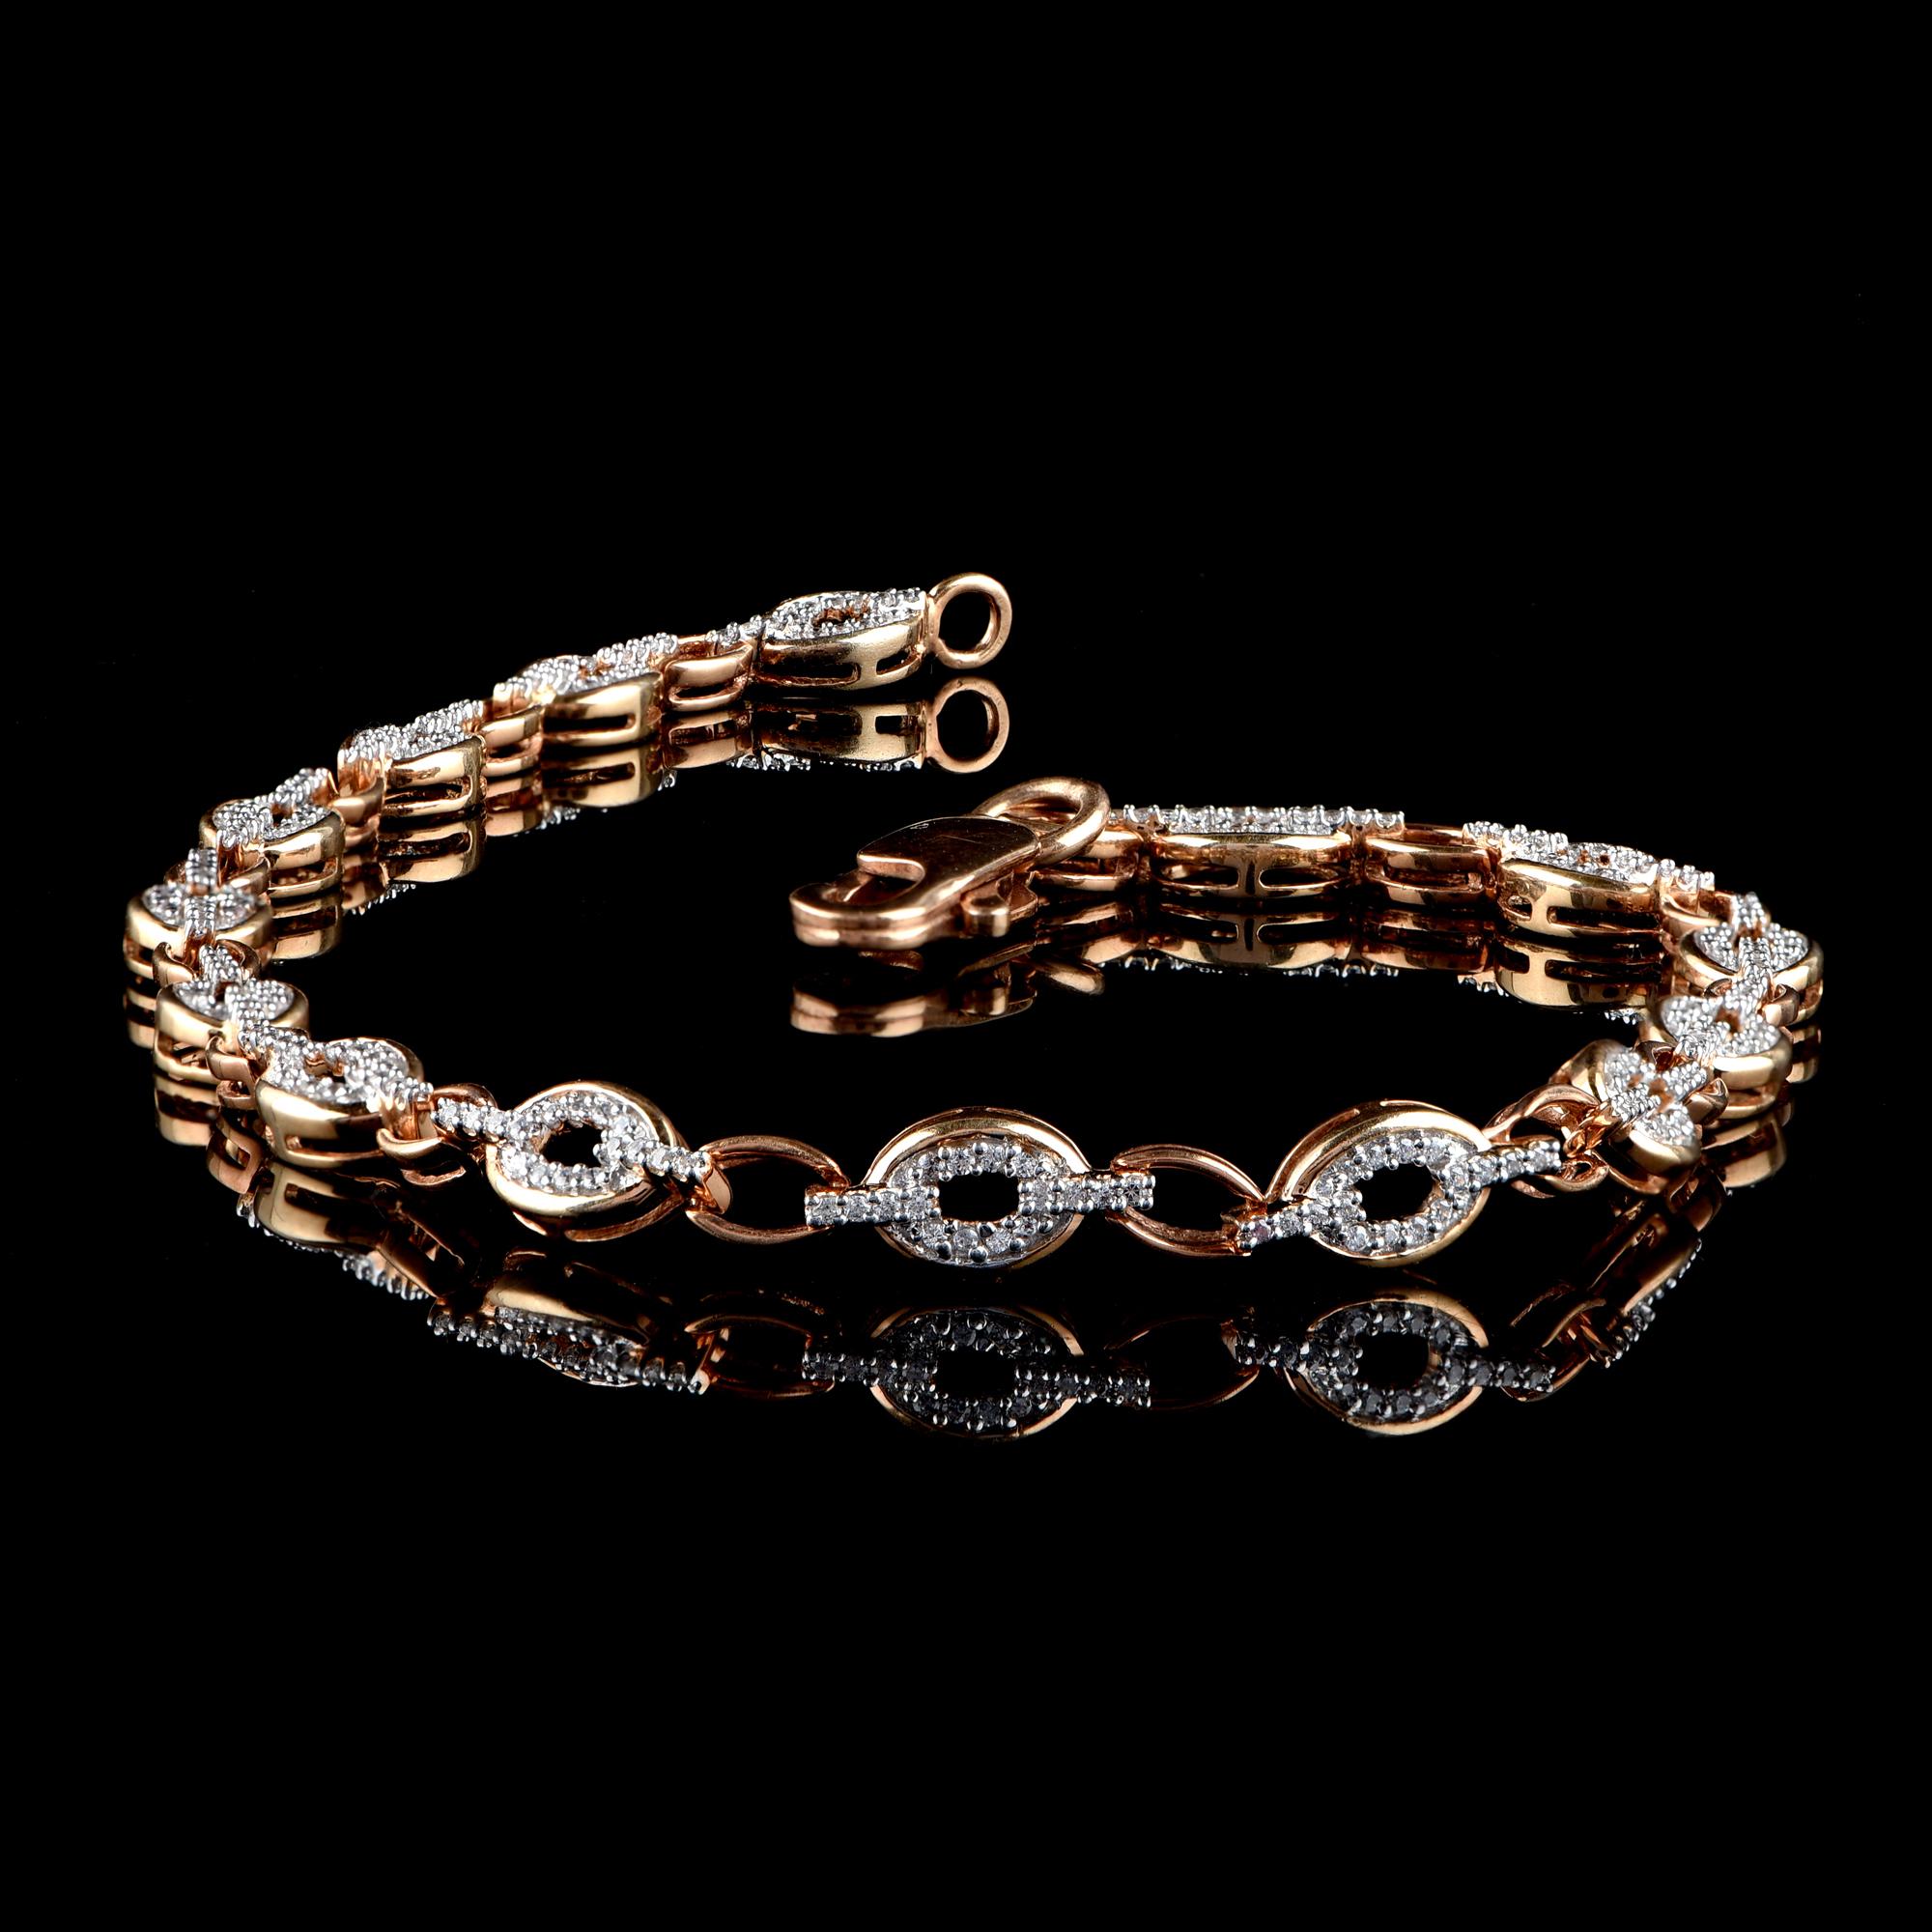 This dazzling designer bracelet features 238 brilliant-cut diamonds embedded beautifully in prong setting and crafted 18-karat rose gold. The diamonds are graded H-I Color, I2 Clarity.
The bracelet secures comfortably with a lobster lock.